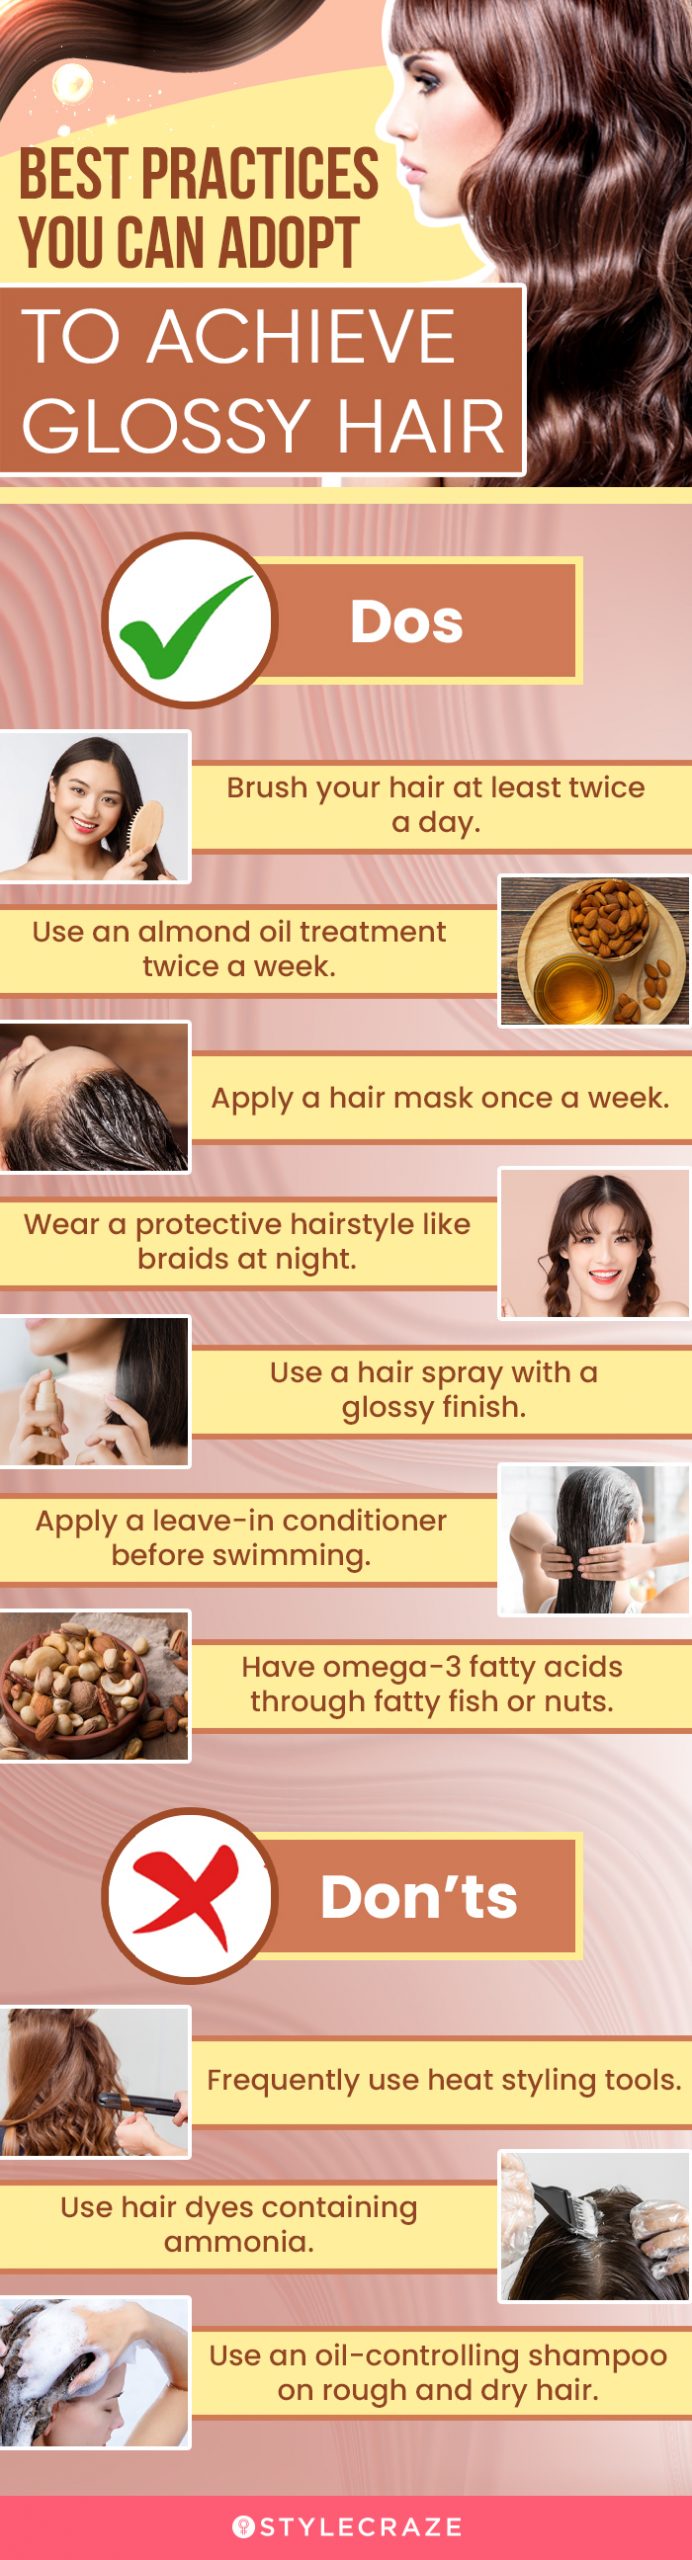 best practices you can adopt to achieve glossy hair [infographic]